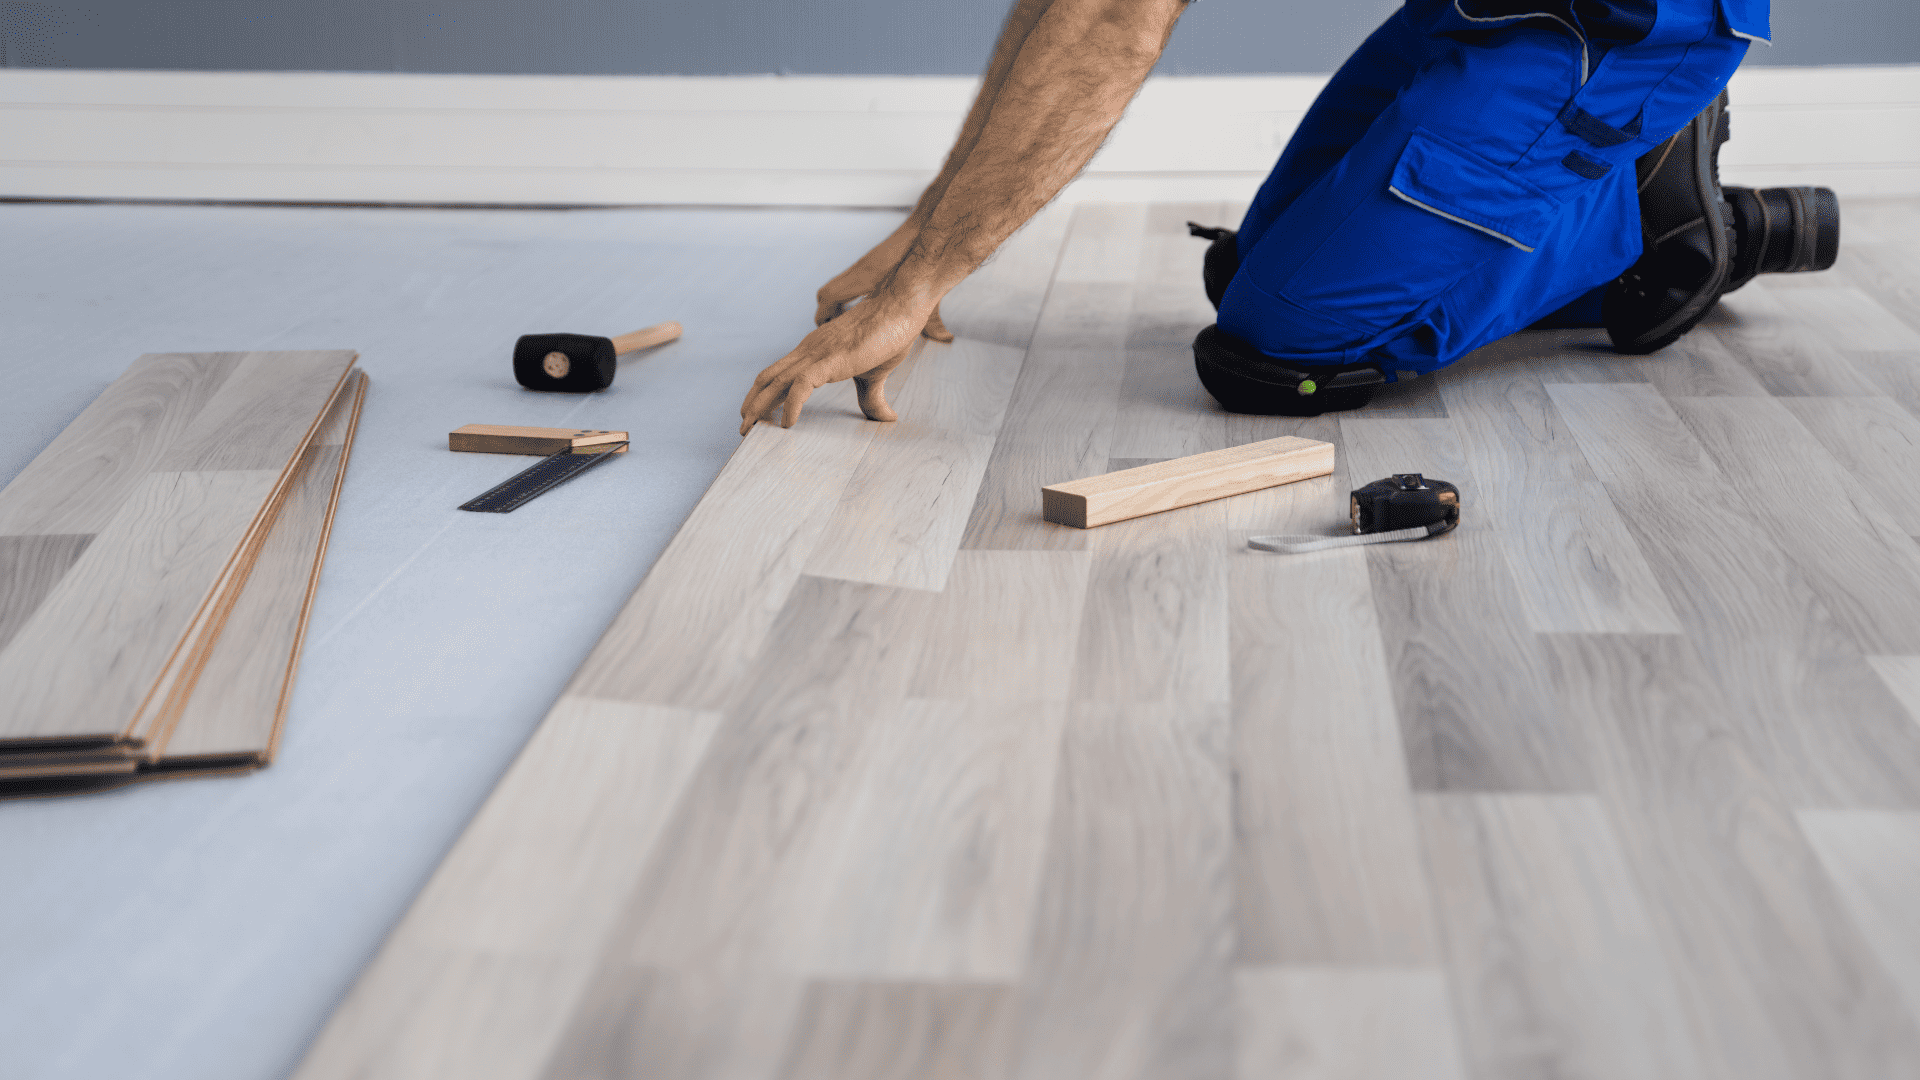 image of guy in jeans installing lvp or laminate flooring - LVP vs LAMINATE FLOORING